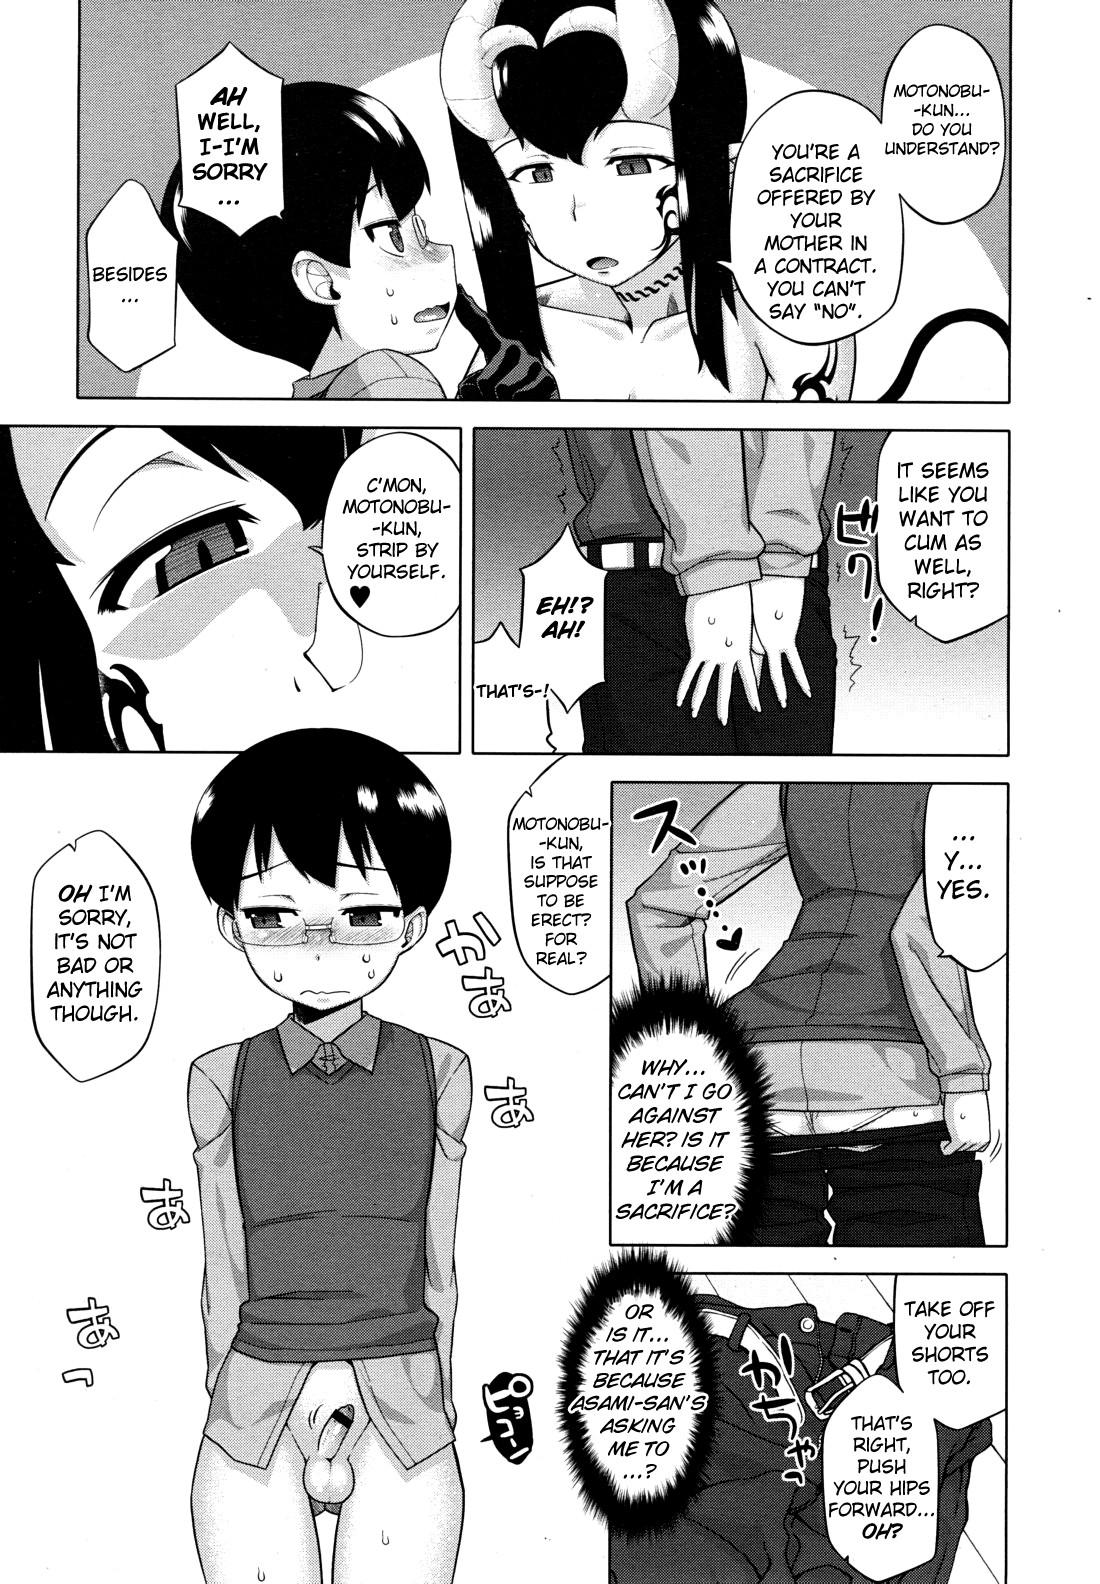 She The Succubus Lady From Next Door Ch. 1-3 Colombian - Page 9